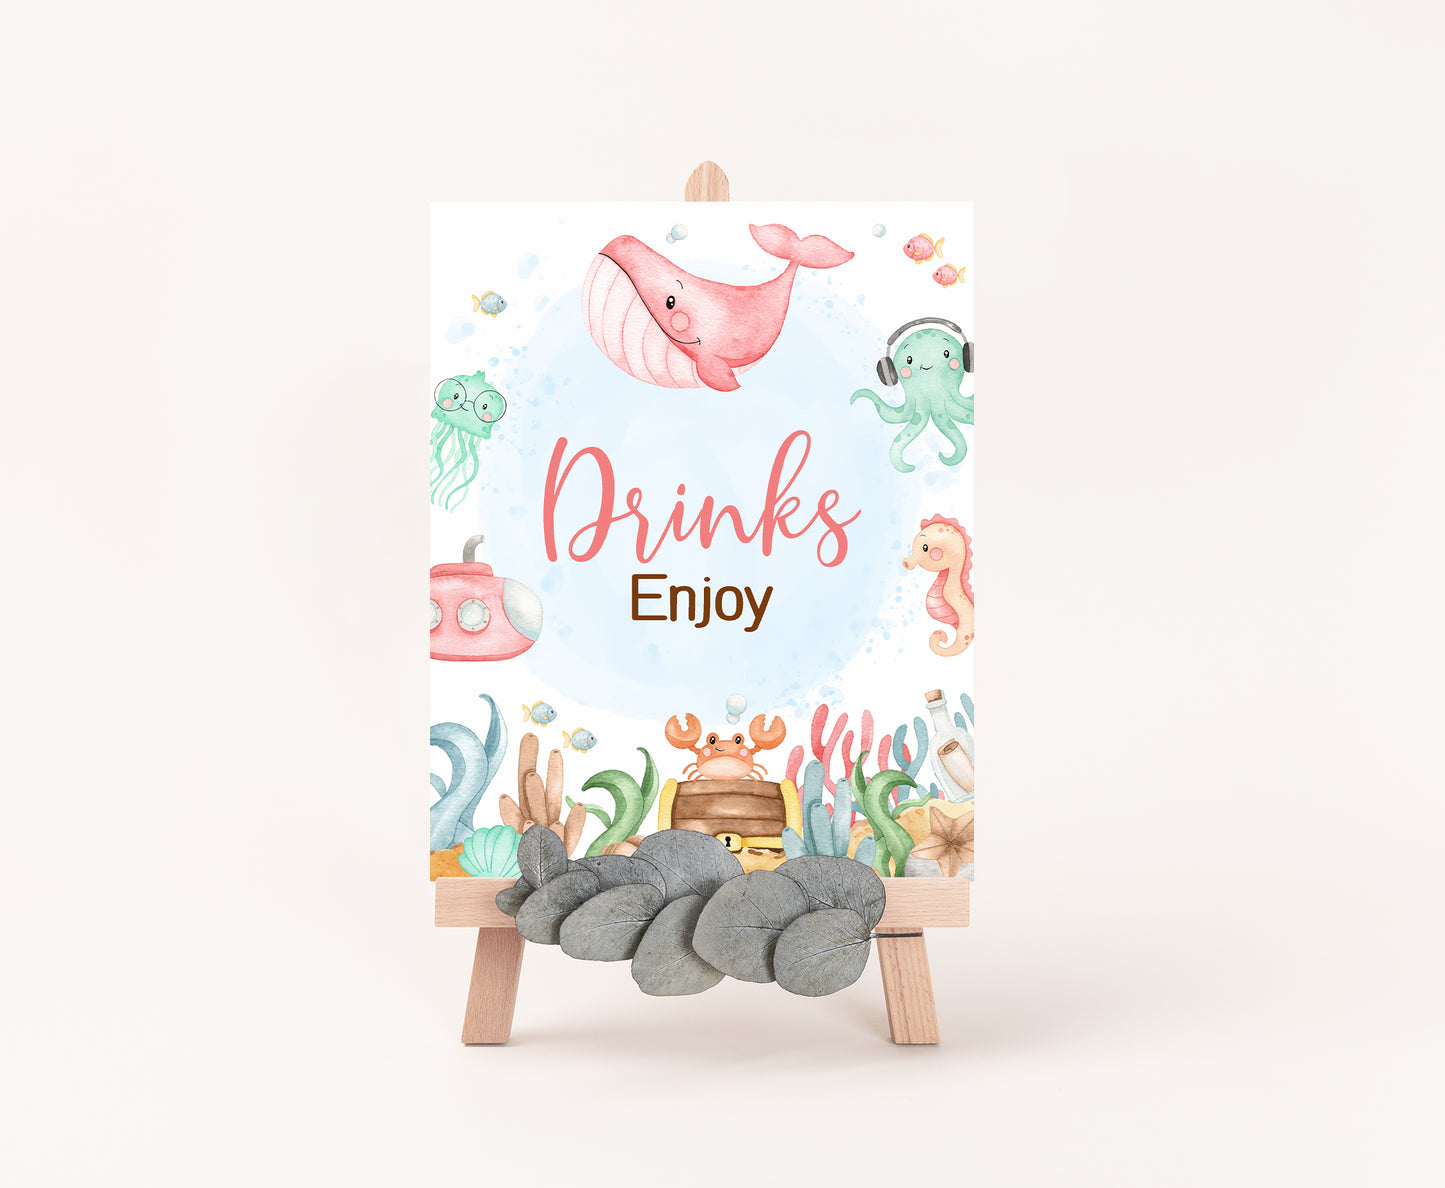 Girl Under the Sea Drinks Sign | Ocean Themed Party Table Decorations - 44A